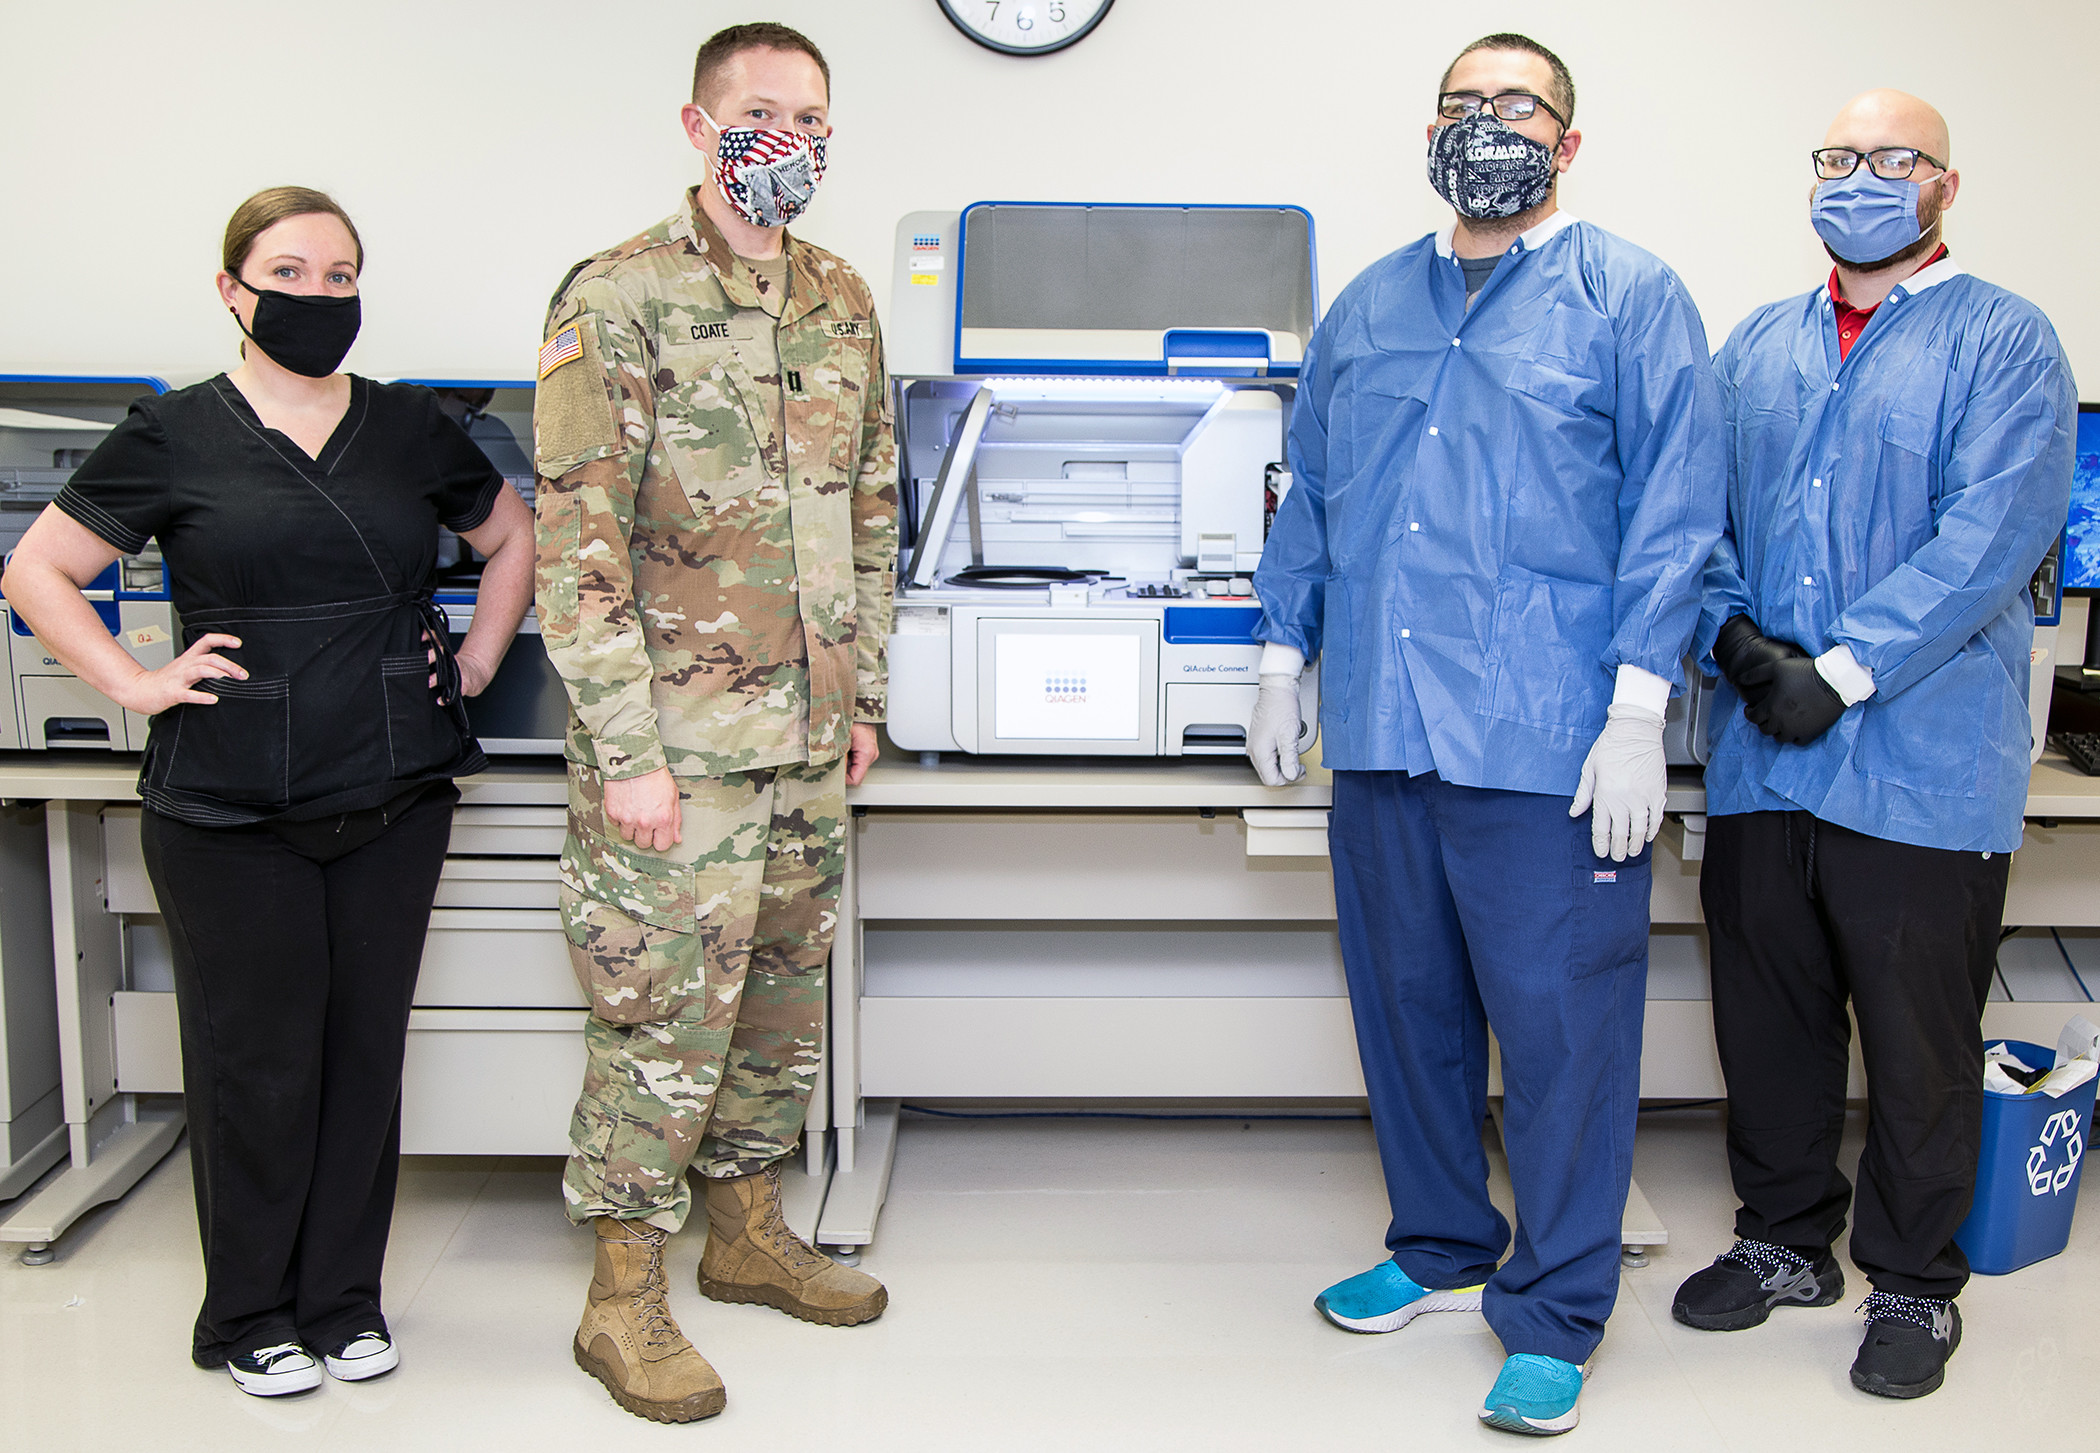 Molecular team members demonstrate molecular ribonucleic acid extraction equipment at Brooke Army Medical Center, Fort Sam Houston, Texas, June 1, 2020. BAMC is actively paving the way for patients to know whether or not they have the virus in a timely manner. (U.S. Army photo by Senior Master Sgt. Sarah Hanaway)